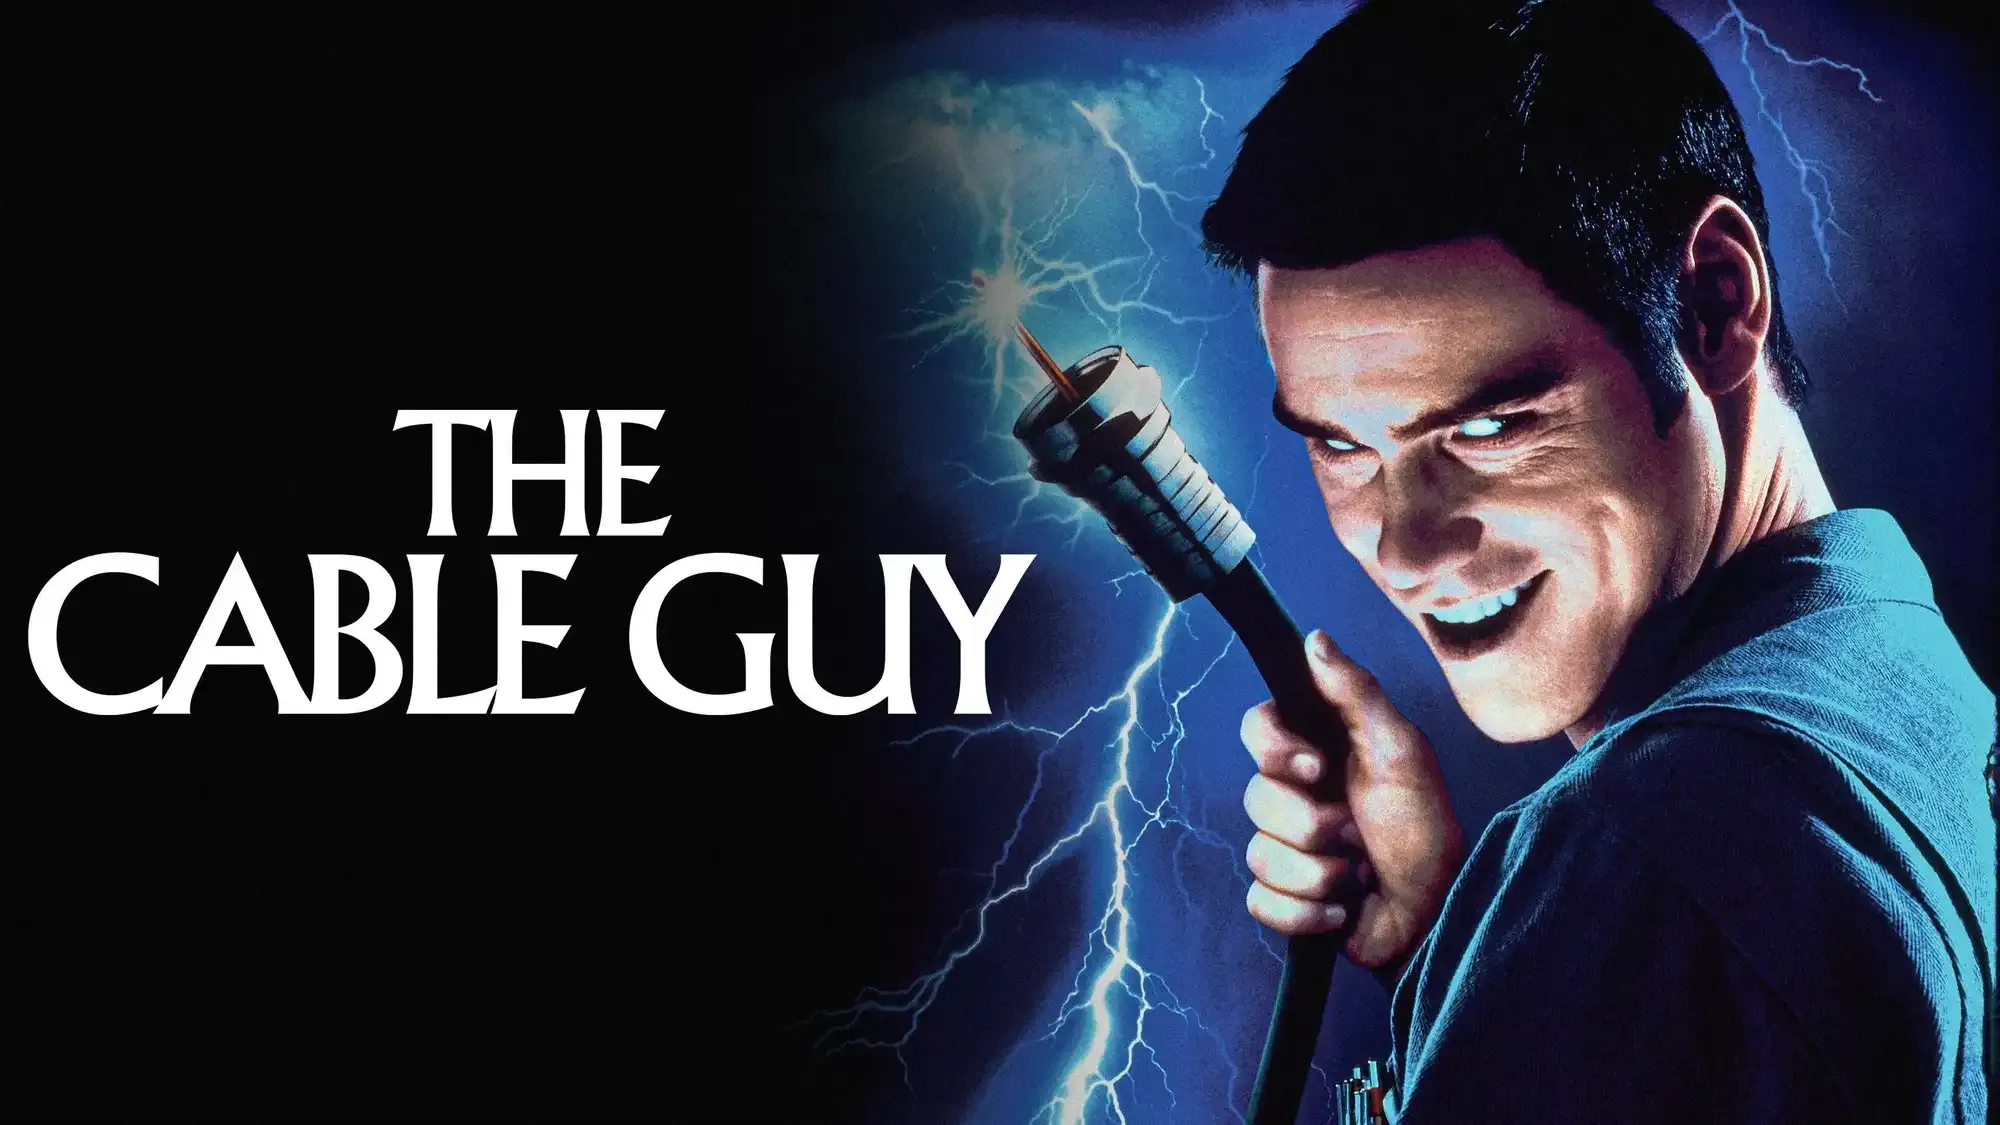 The Cable Guy movie review